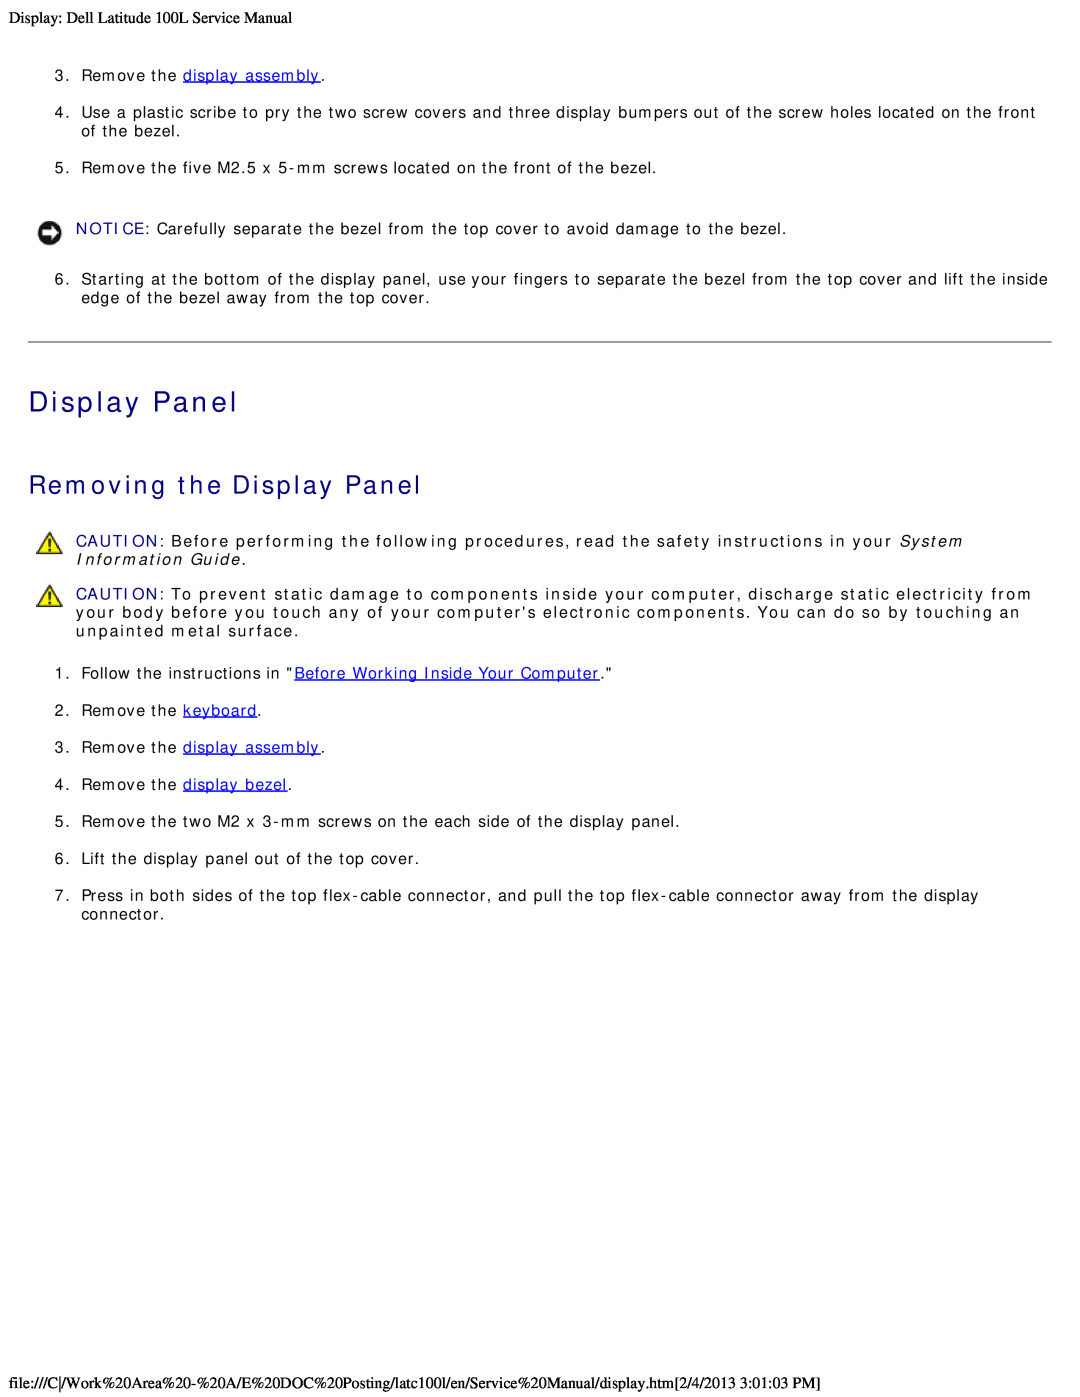 Dell 100L service manual Removing the Display Panel, Remove the display assembly 